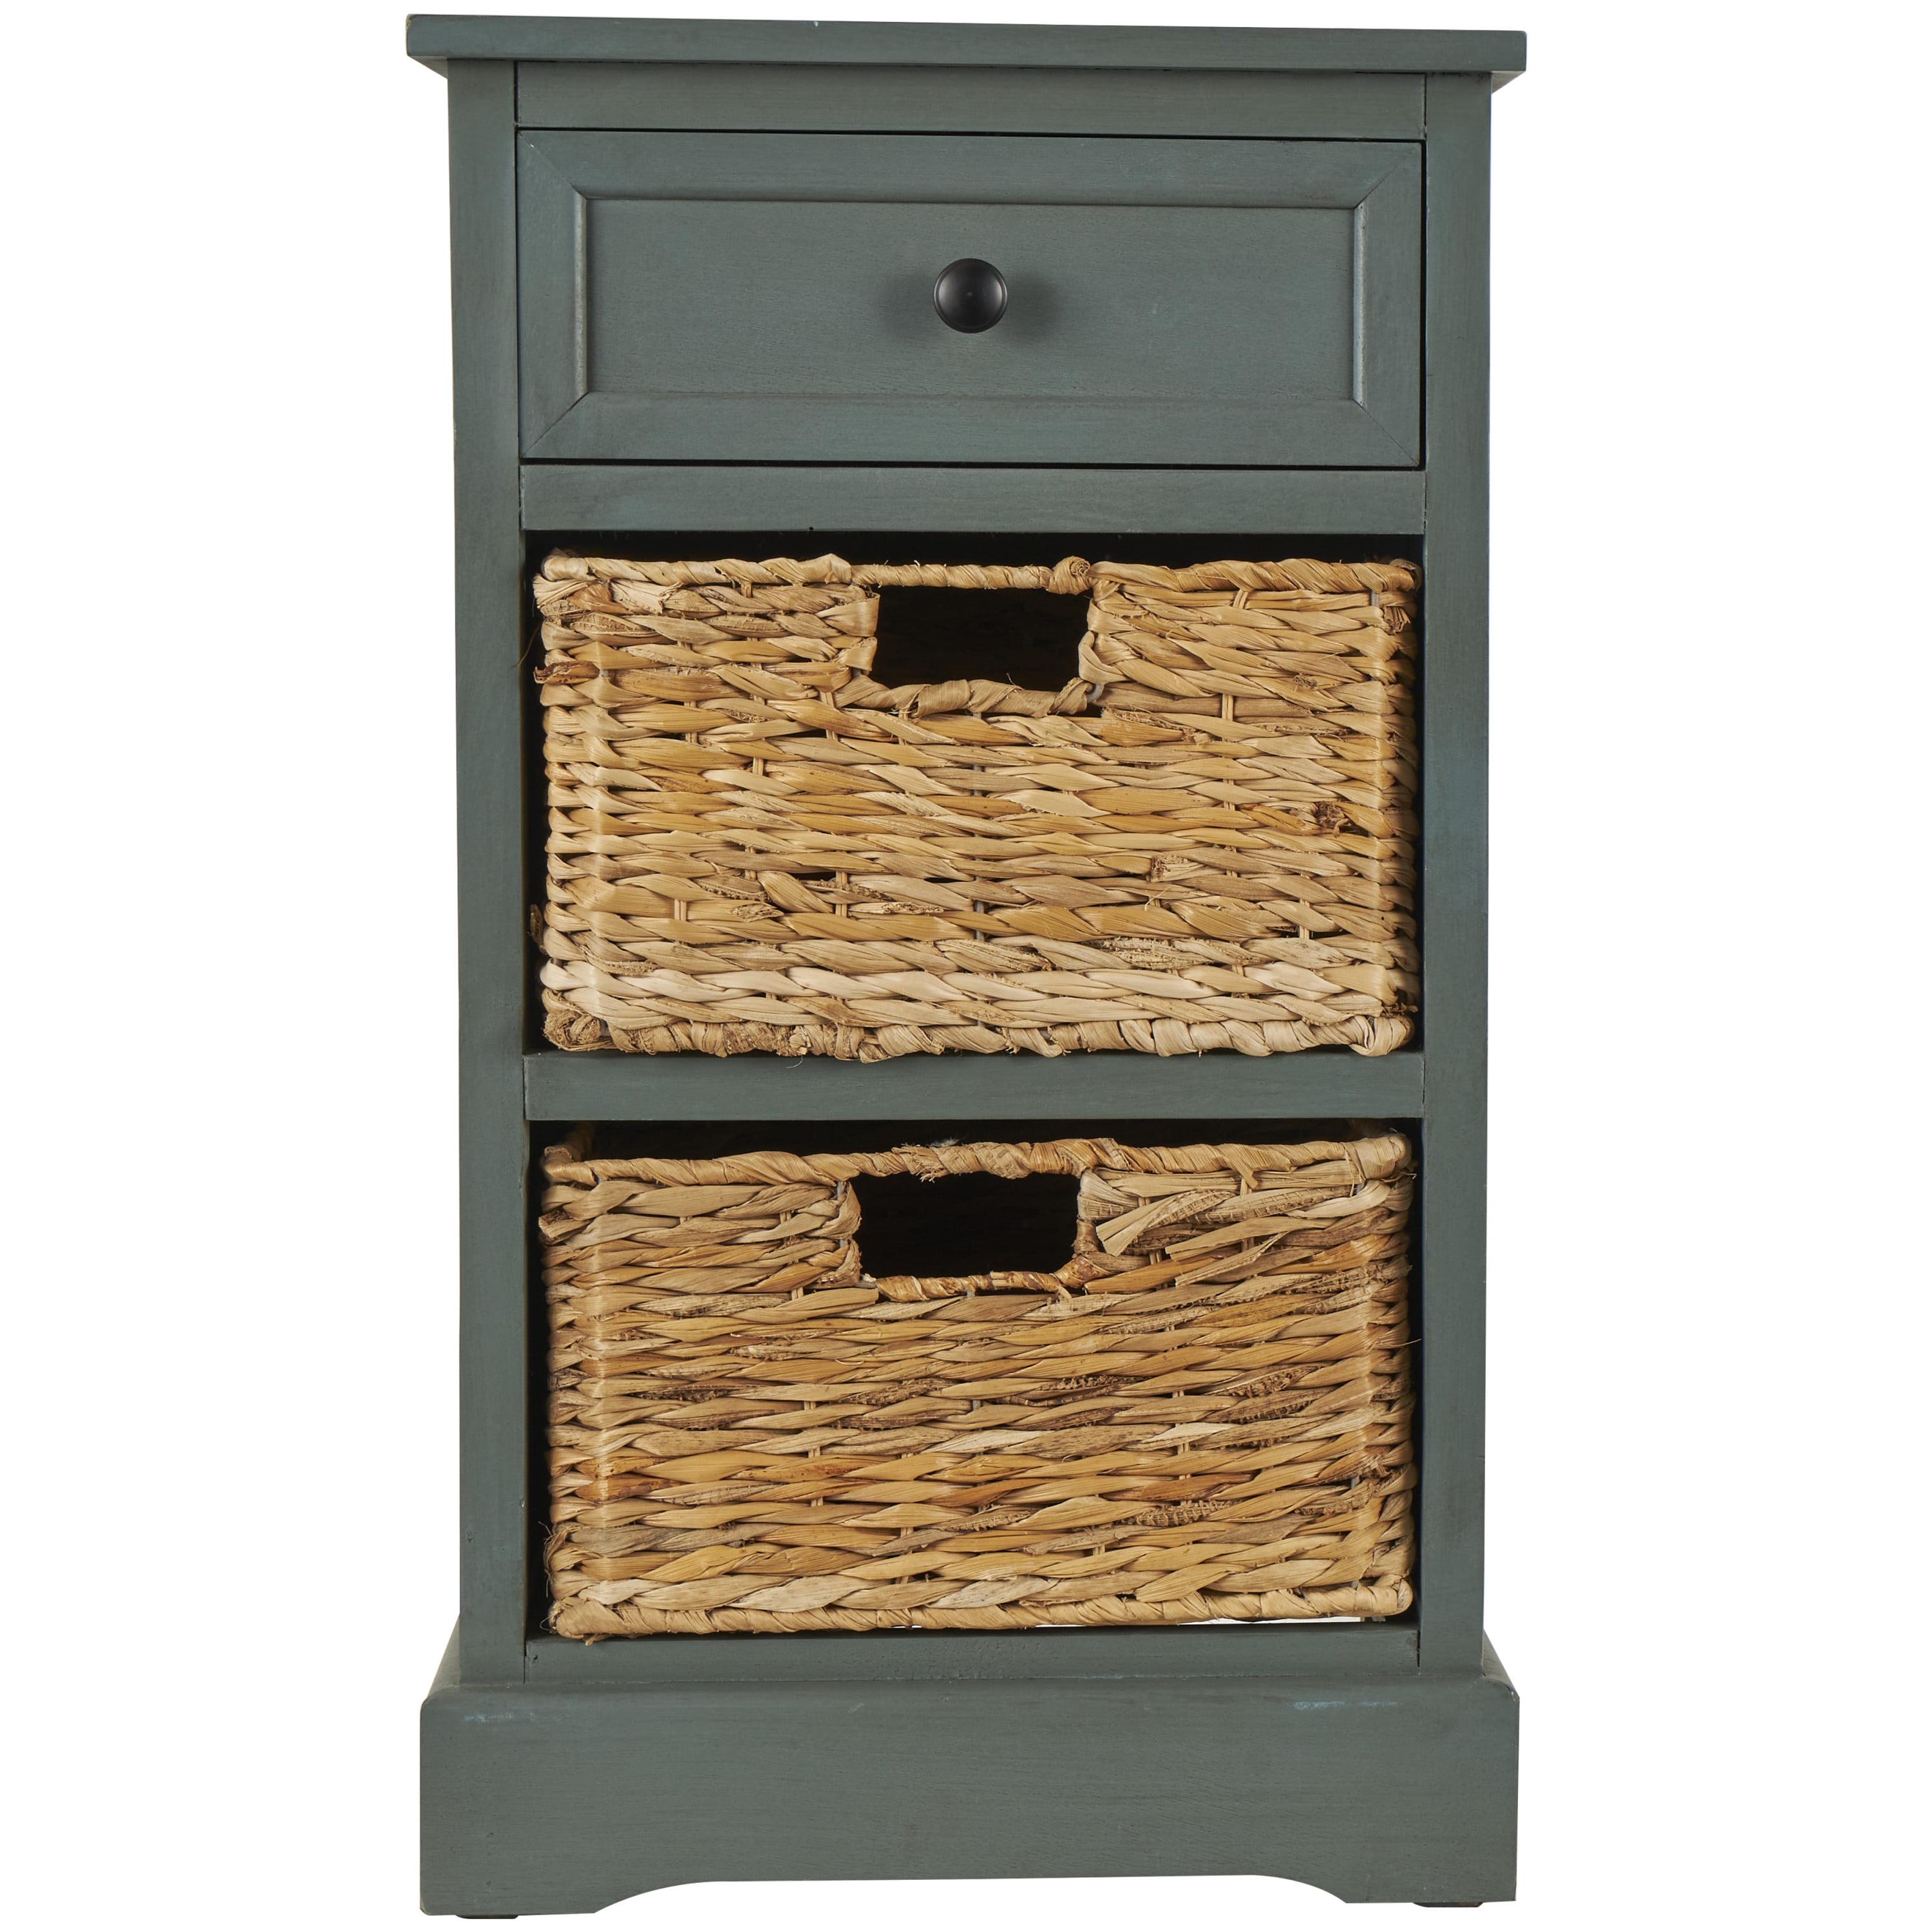 Teal Solid Wood Rectangular Side Table with Seagrass Baskets and Drawer